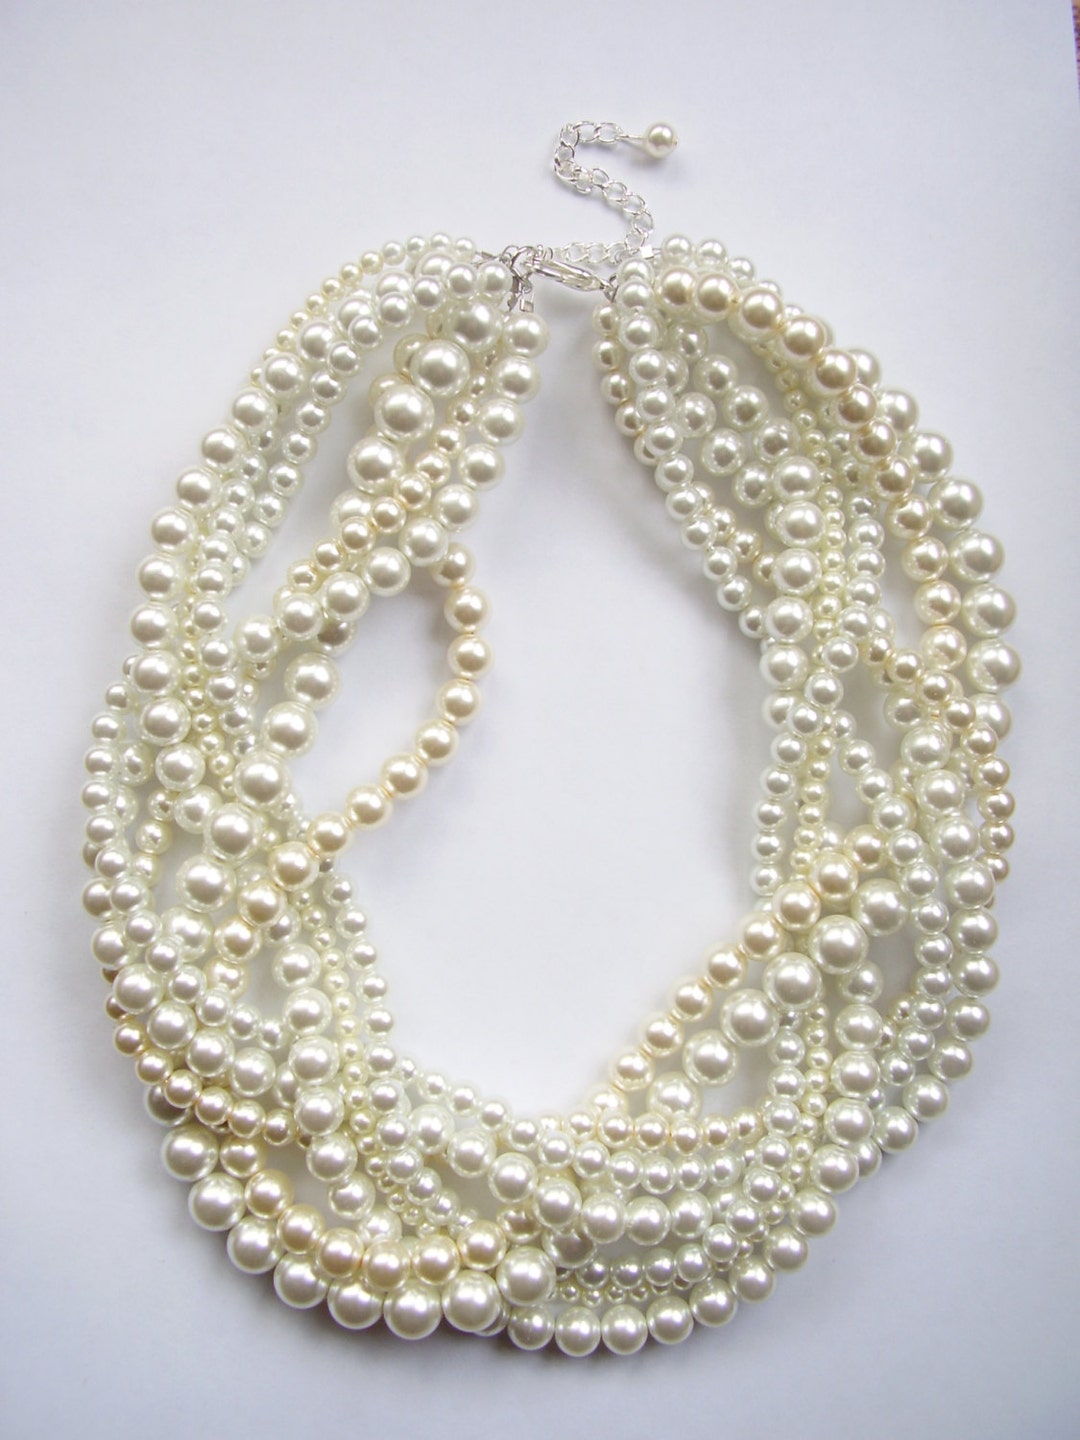 Bridal White and Ivory Pearl Necklaces Custom Order Necklaces Braided ...